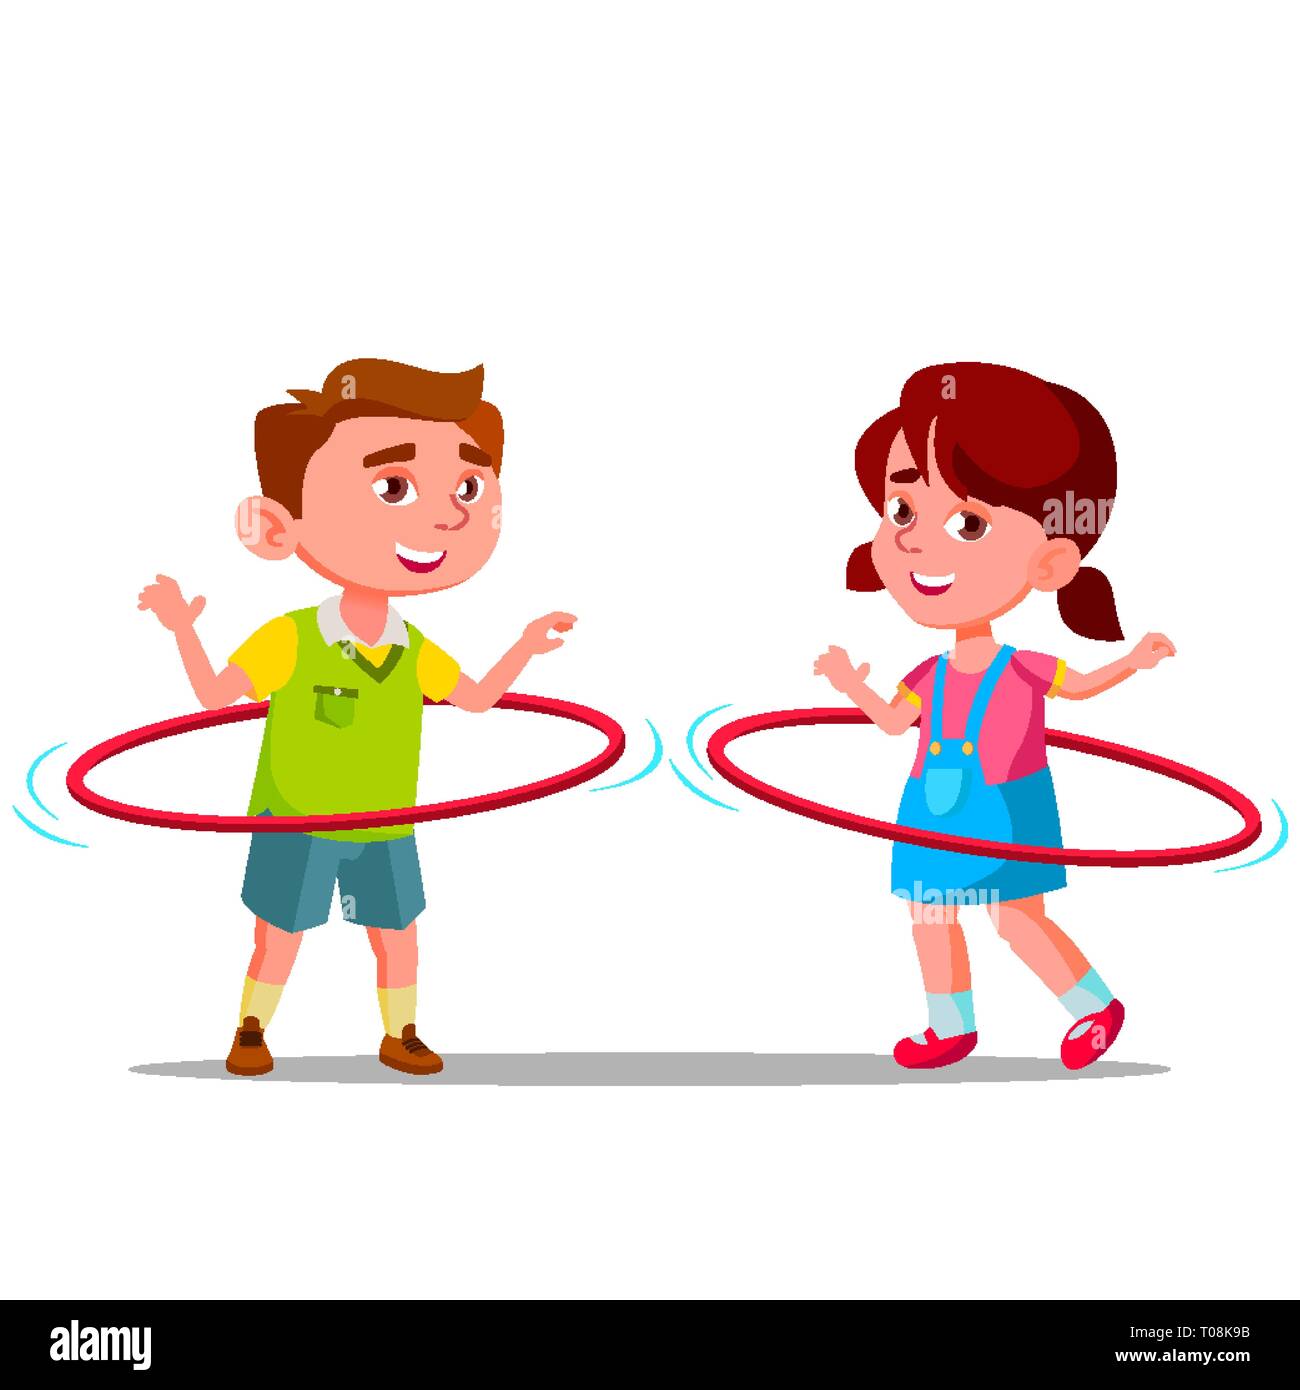 Little Boy And Girl Twirling Colored Huha Hoops Vector Flat Cartoon Illustration Stock Vector